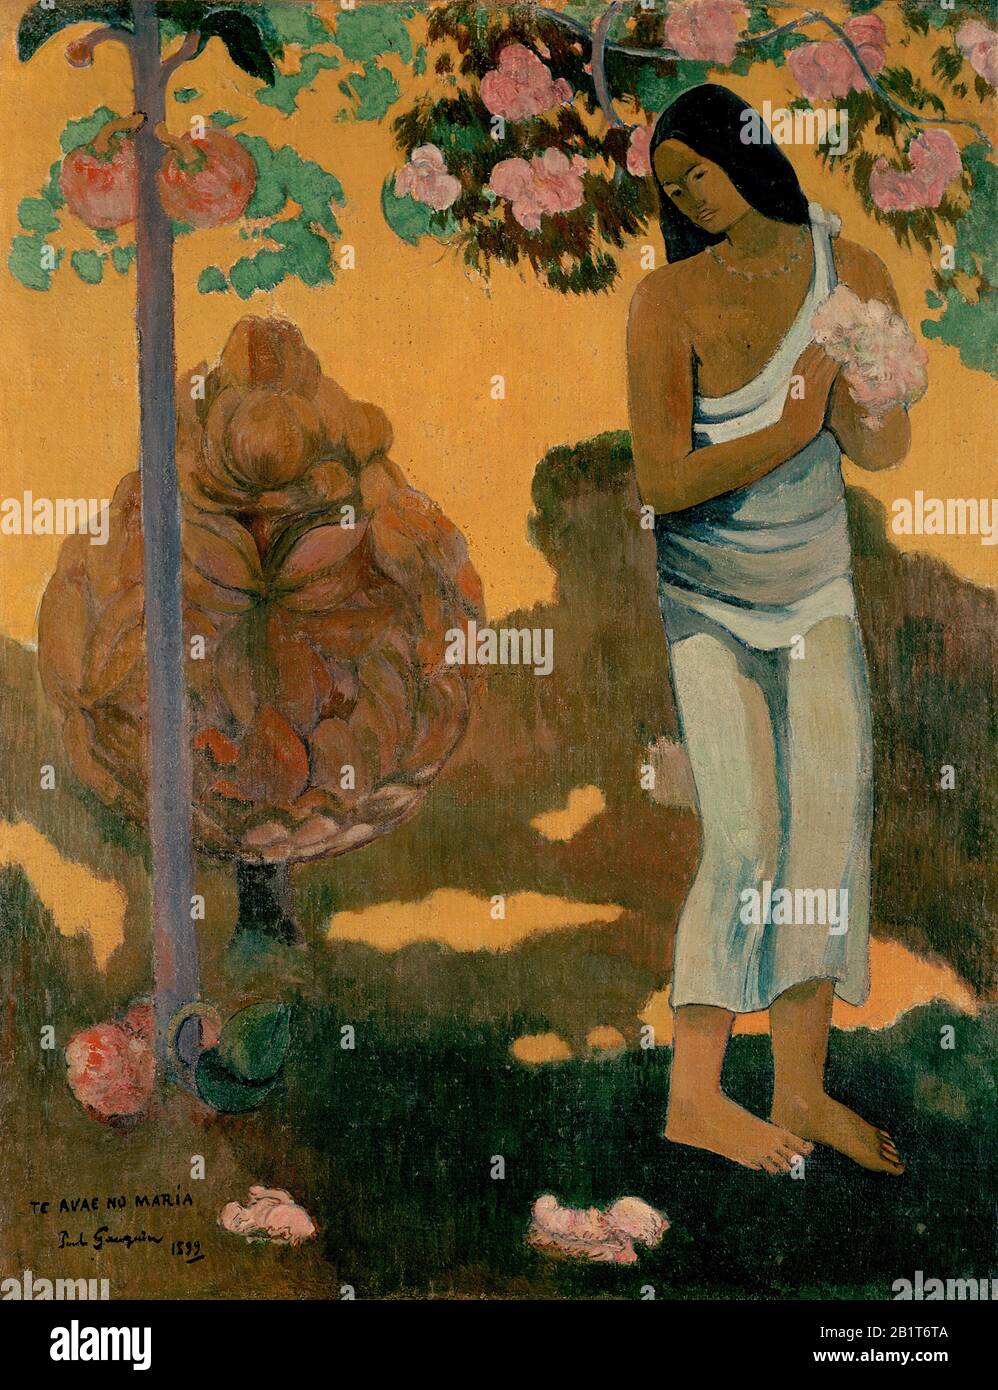 The Month of Mary (Le Mois de Marie) (1899) 19th Century Painting by Paul Gauguin - Very high resolution and quality image Stock Photo